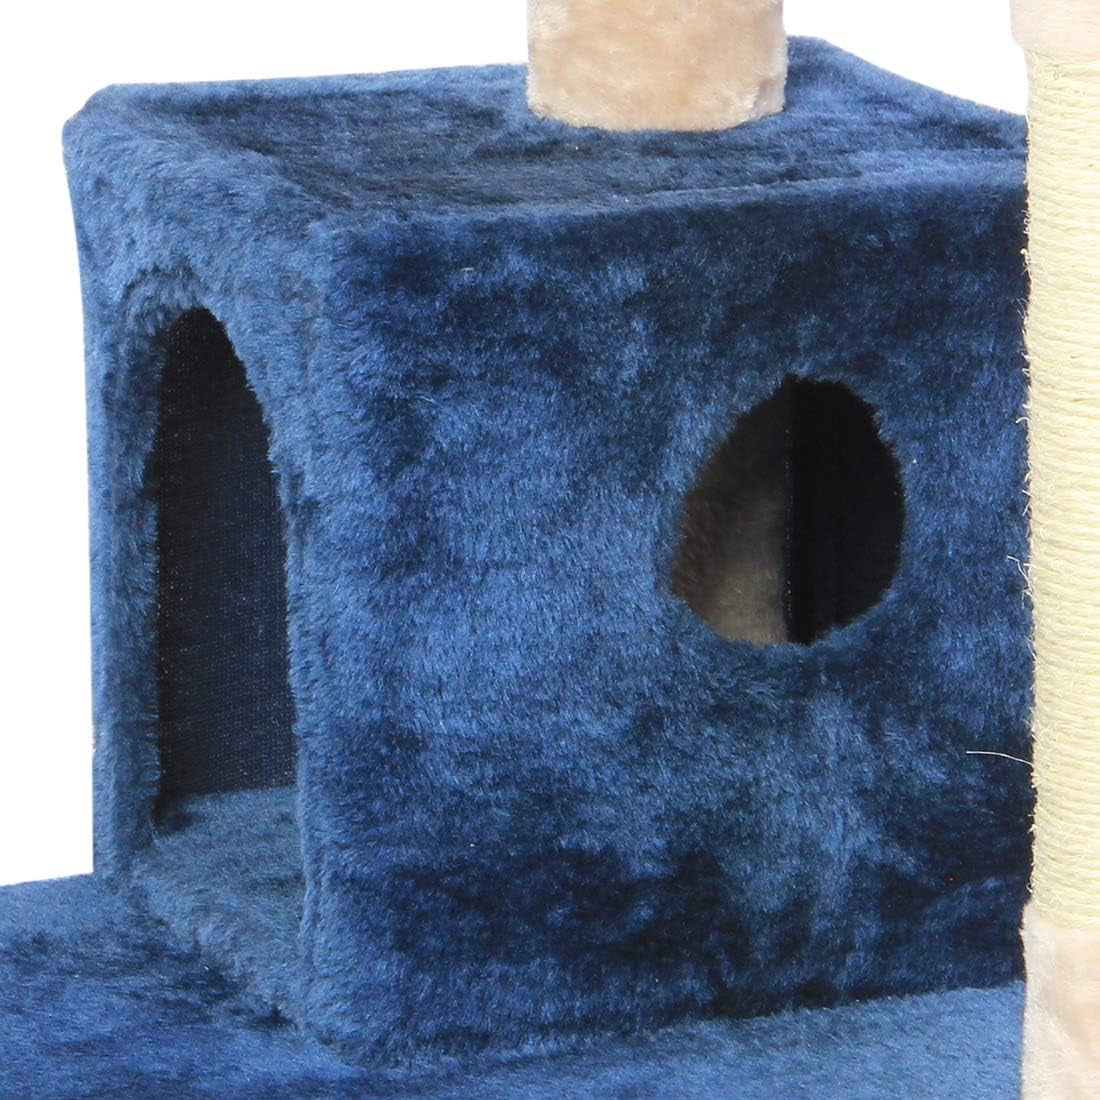 Blue Flannelette Cat Tree - Multi-Level Pet Condo Furniture with Sisal Scratching Posts, Ideal for Cats and Kittens, 51 Inches High